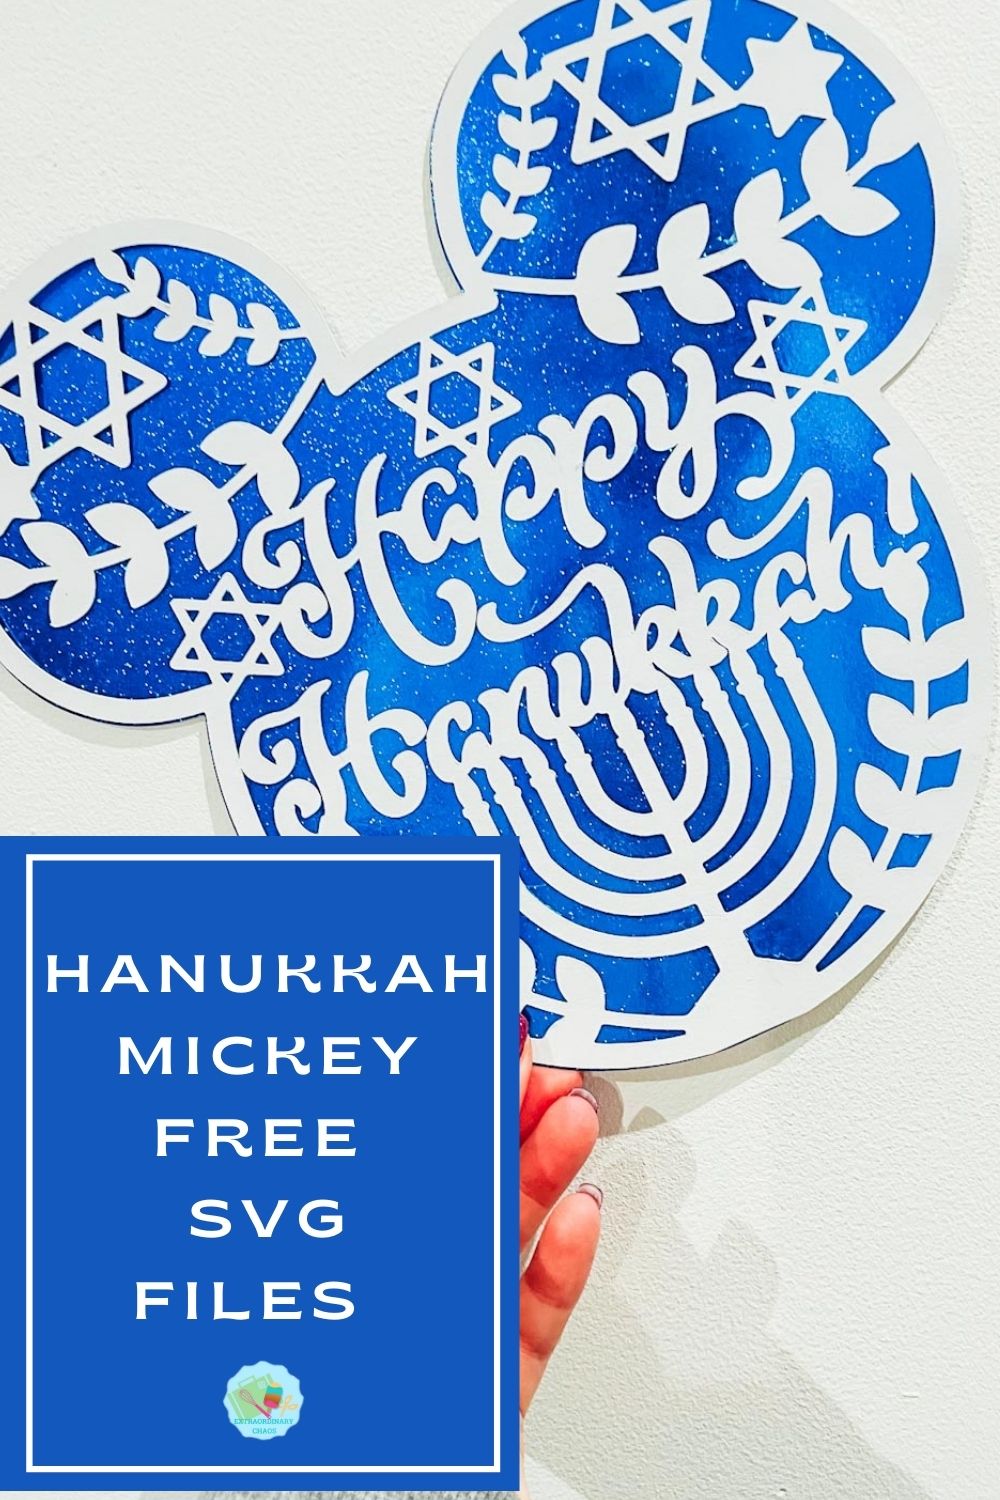 Hanukkah Mickey Free SVG, PNG files for Crafting with Cricut or Silhouette -2